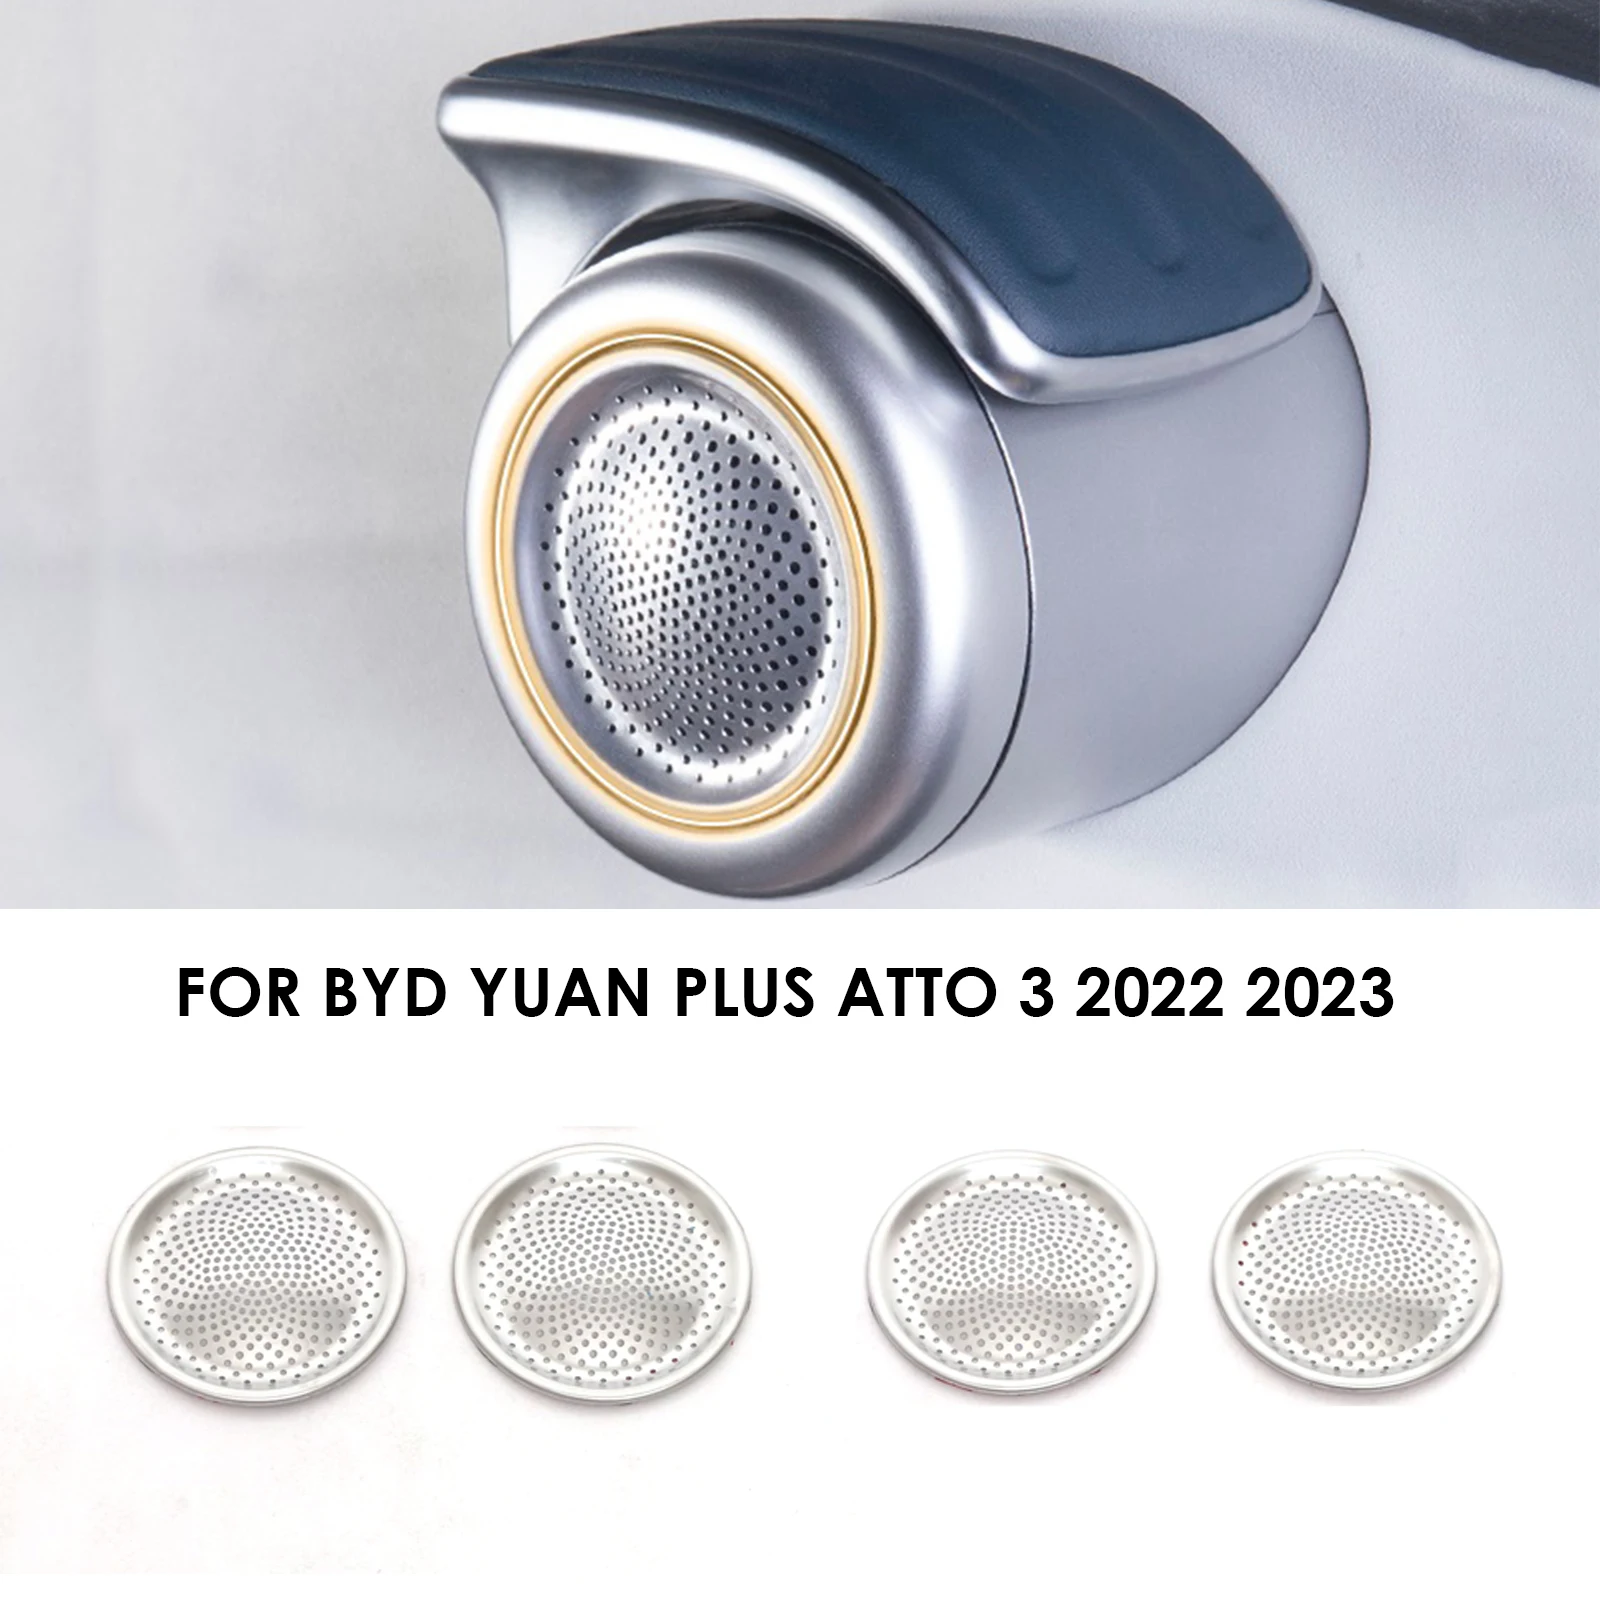 

For BYD YUAN PLUS ATTO 3 2022 2023 Stainless Steel 4Pcs door Speaker Ring Cover Car Door Audio Sound Frame Loudspeaker Covers